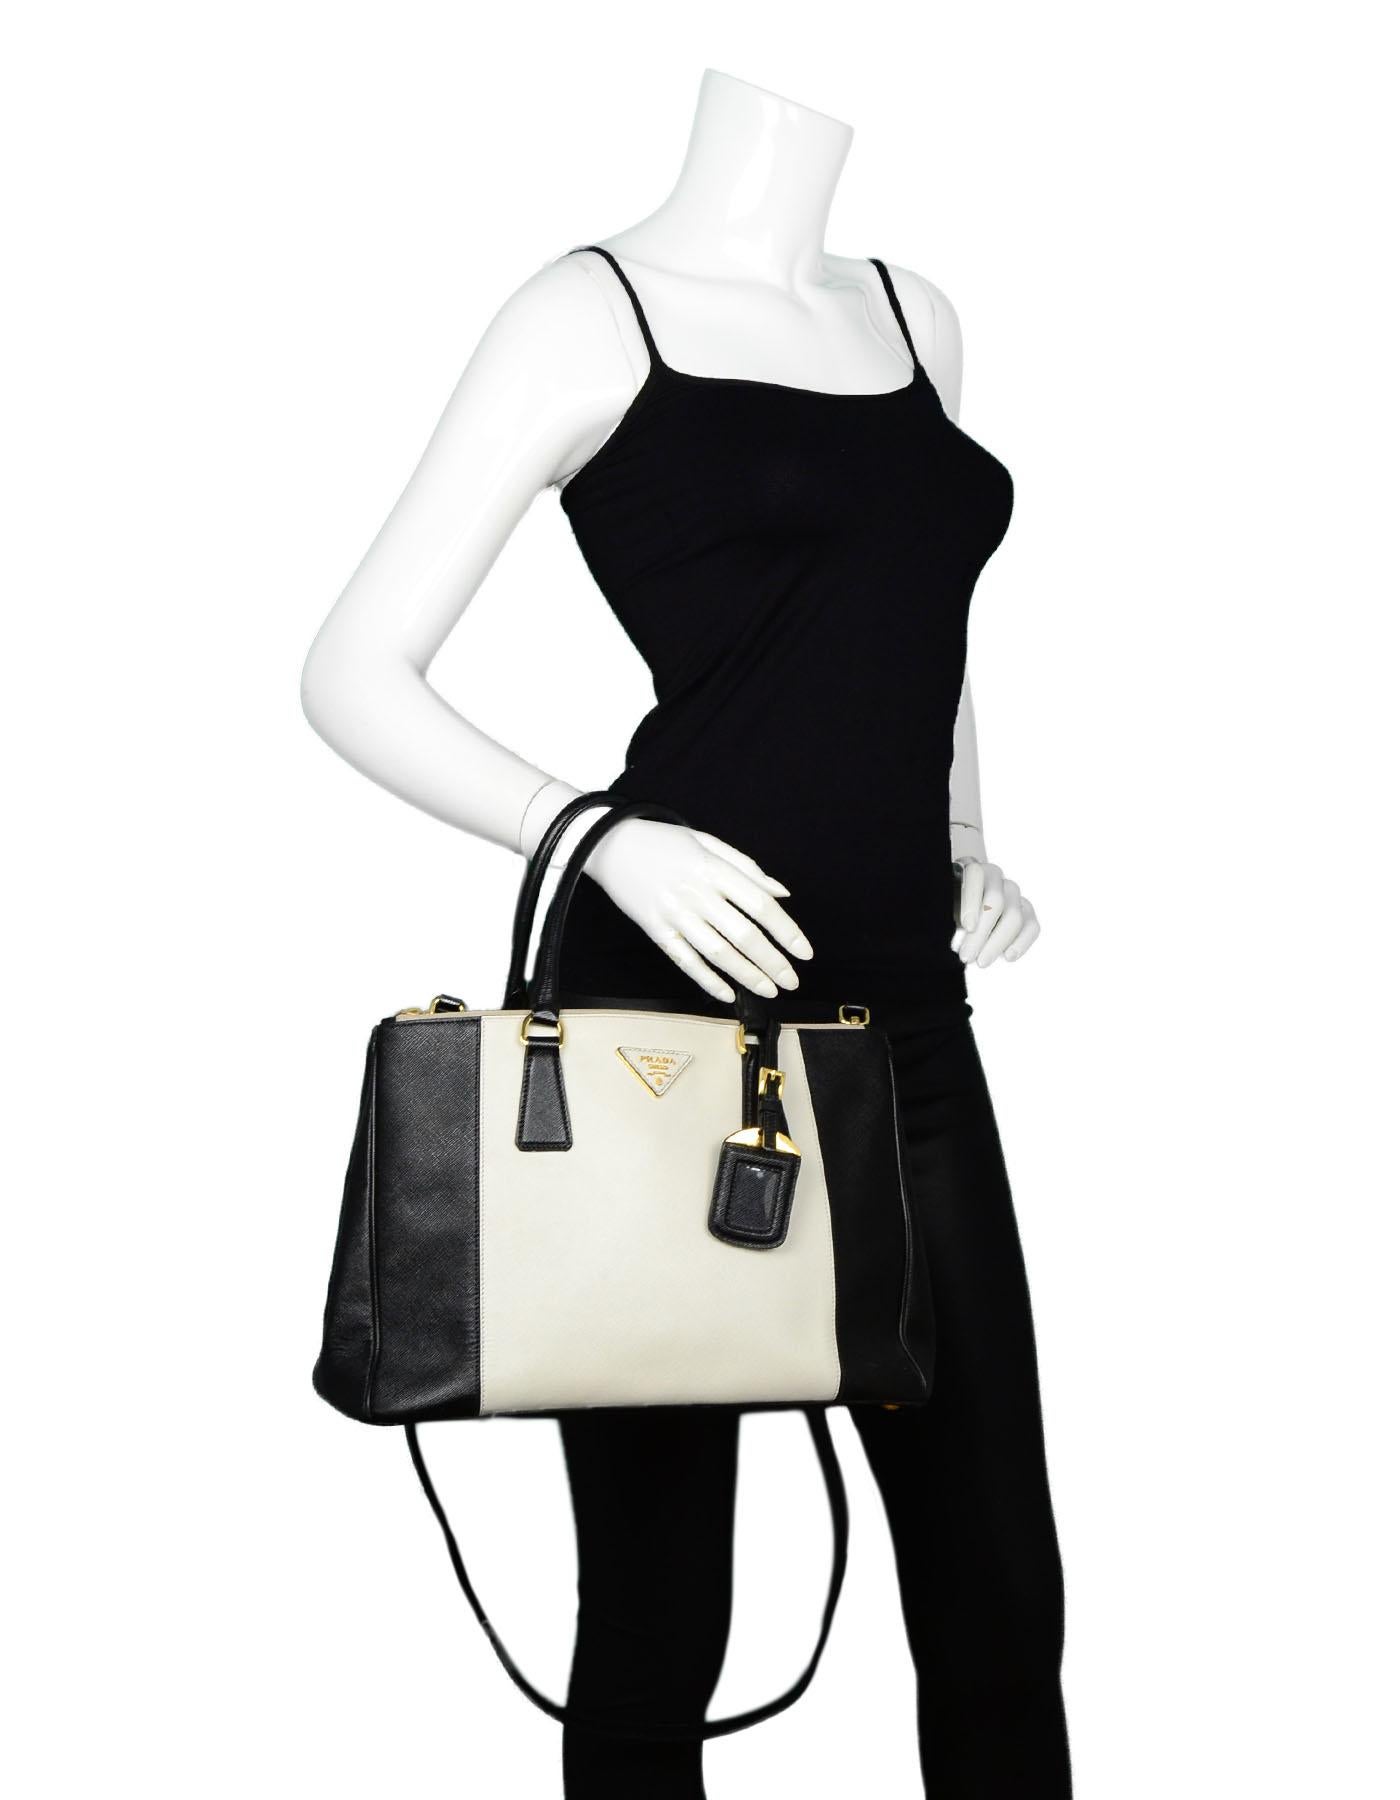 Prada Black & White Saffiano Leather Medium Double Zip Tote Bag B2274C, features removable crossbody strap.

Made In: Italy
Year of Production: 2013
Color: Black, White
Hardware: Goldtone hardware
Materials: Leather
Lining: Black monogram